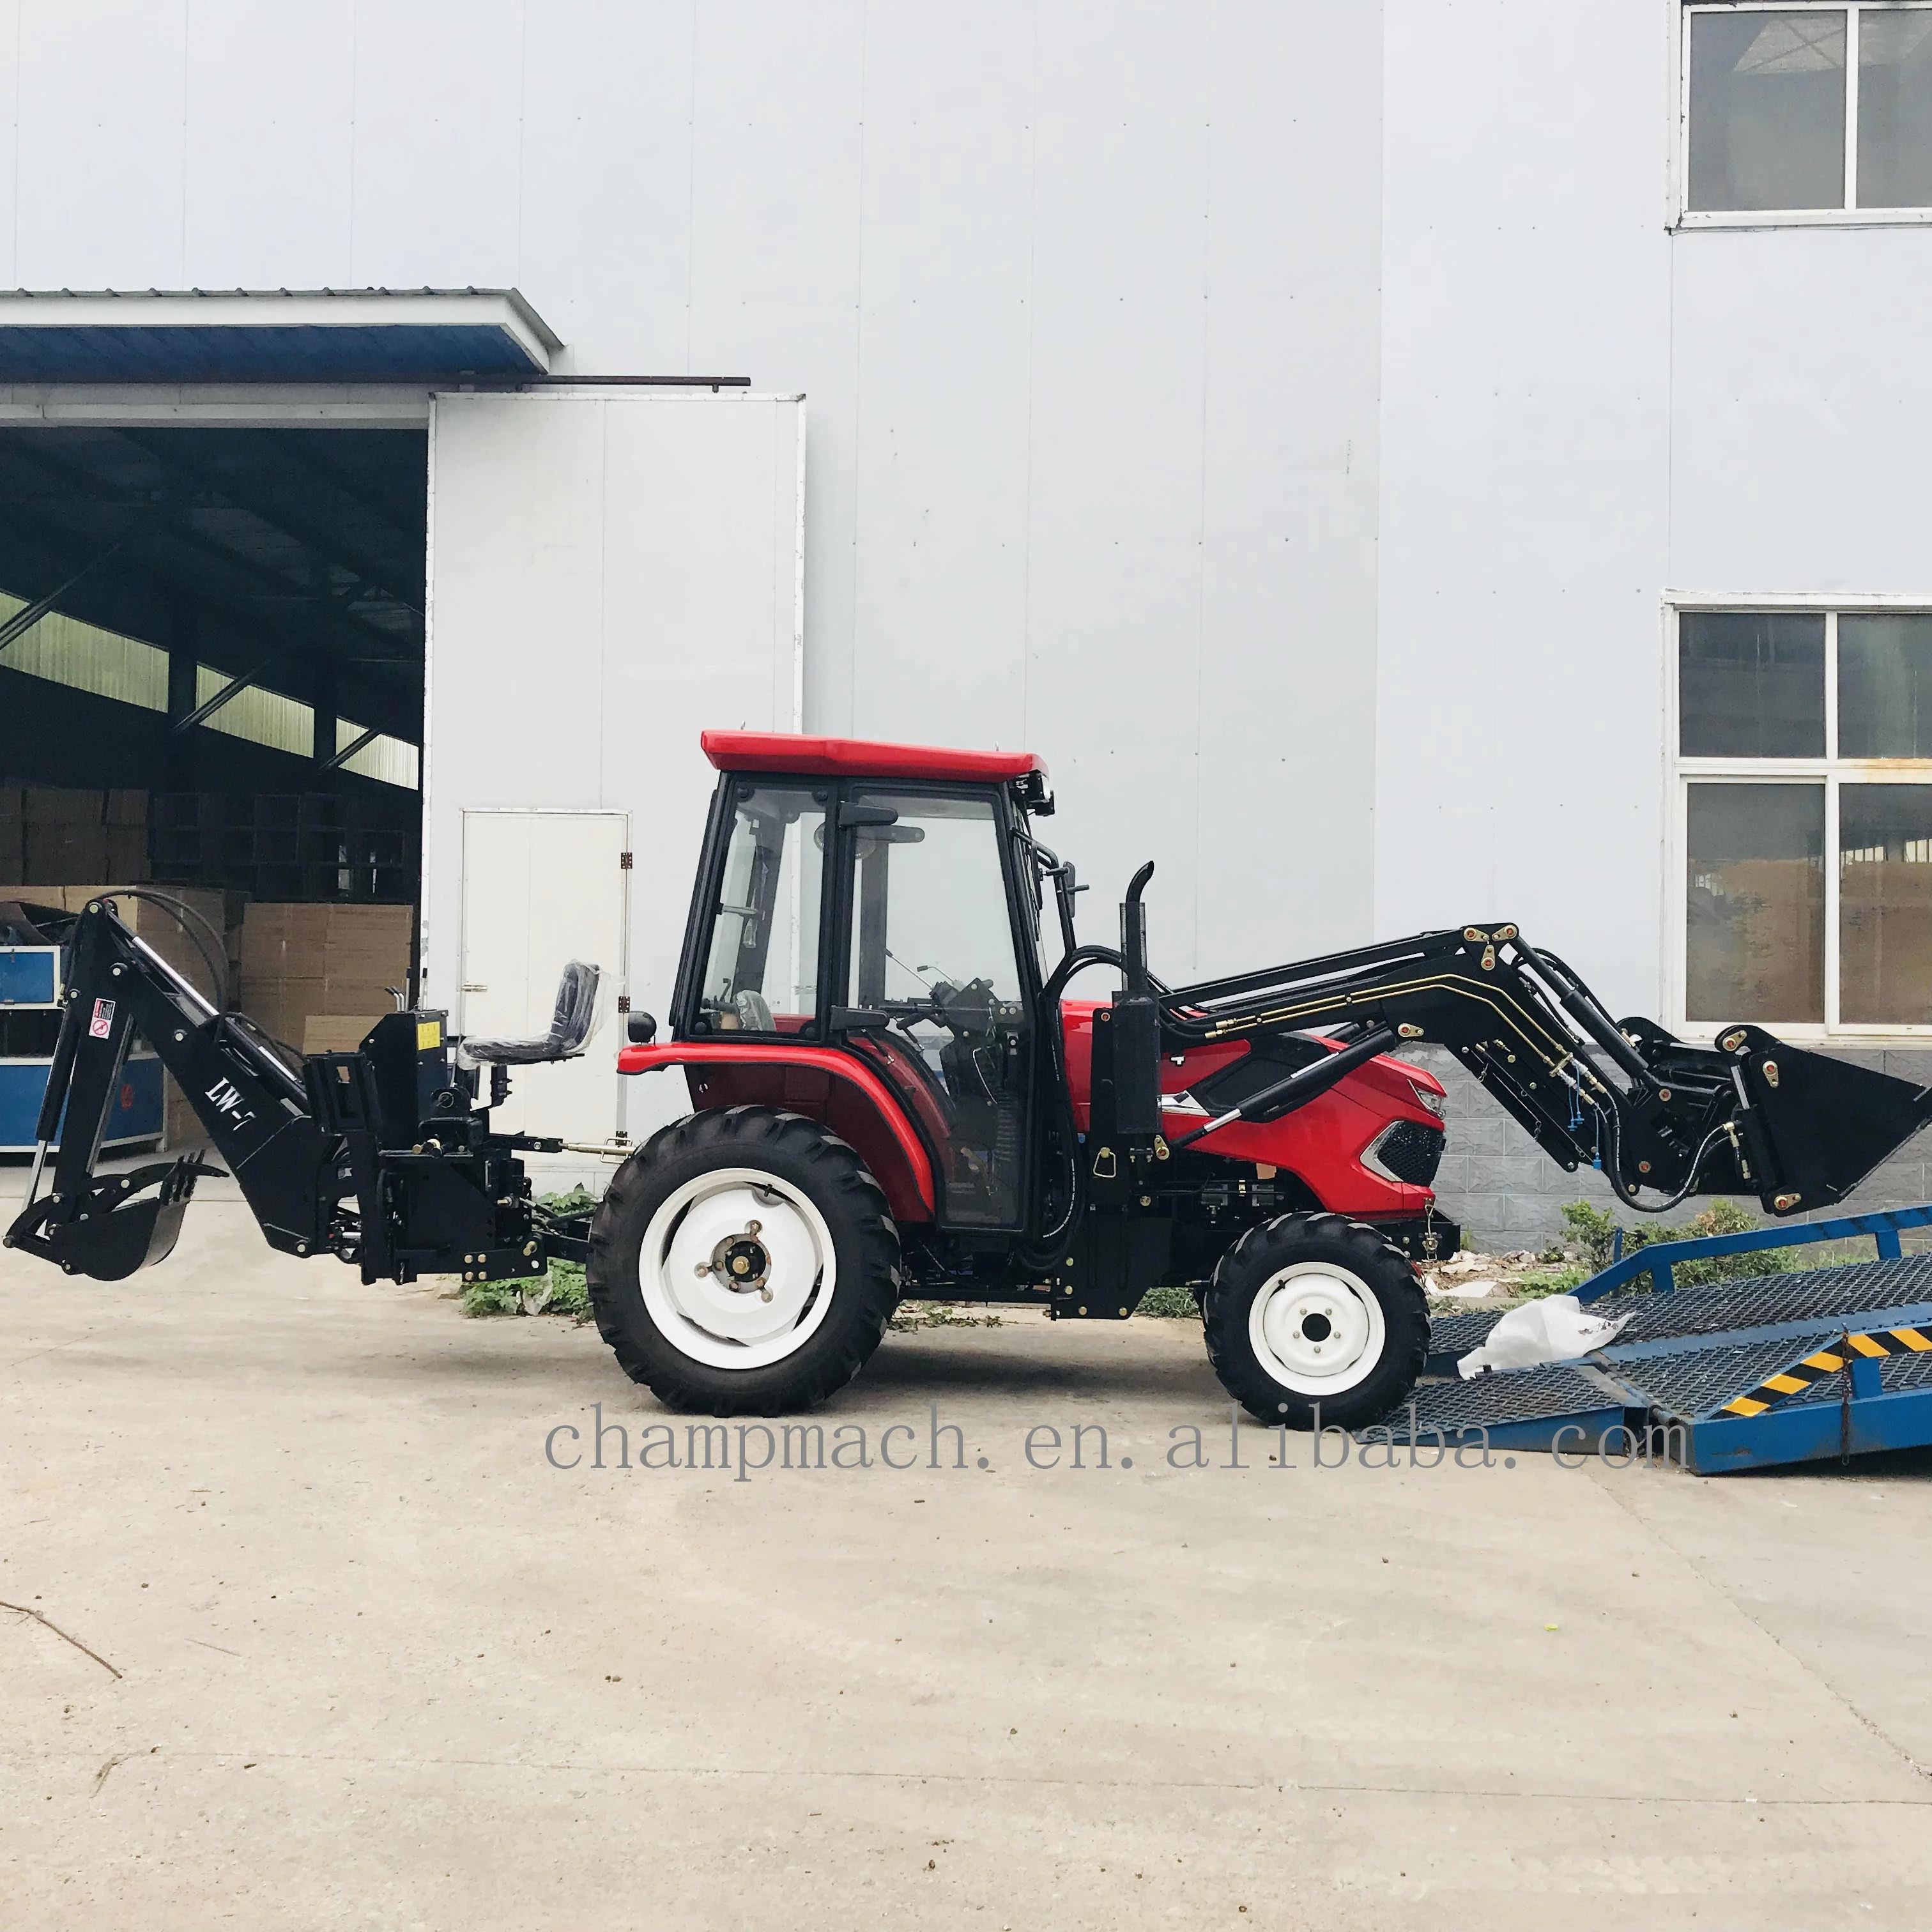 25hp 4wd mini farm tractors with front end loader and back hoe